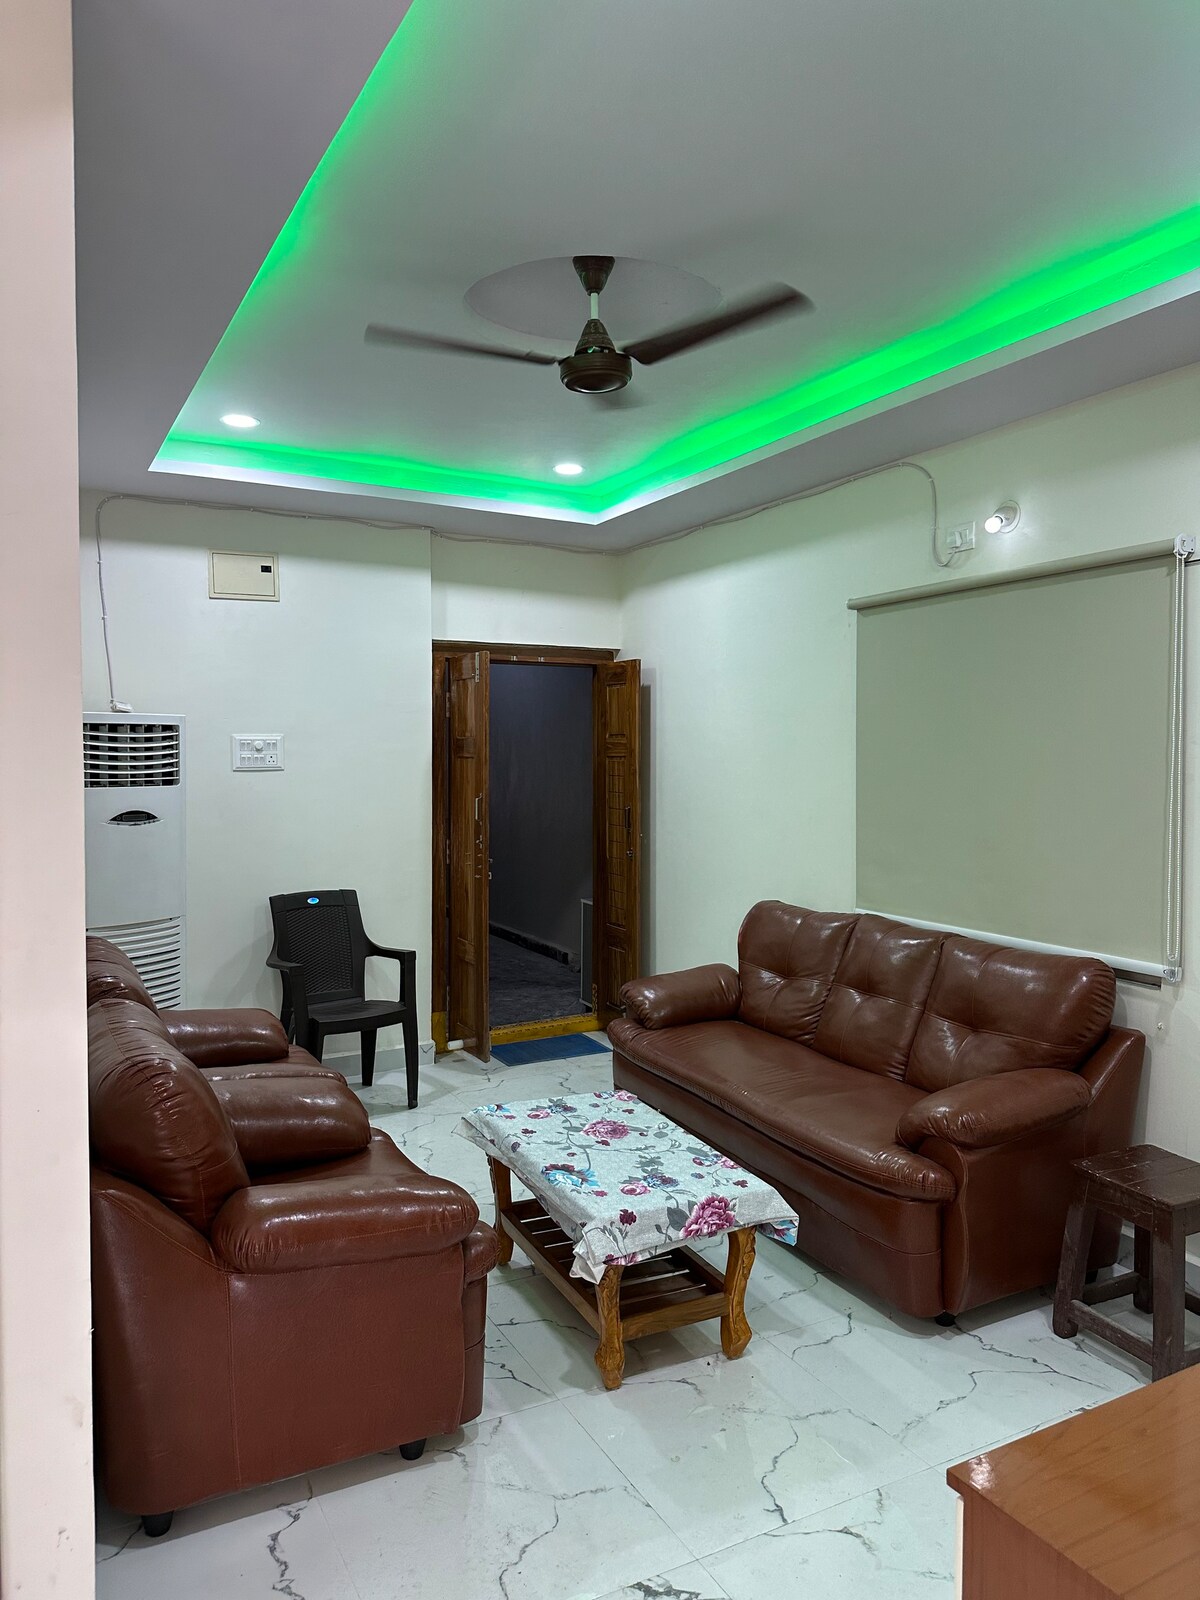 Welcome to our cozy flat
its a 2bhk each of 2flats